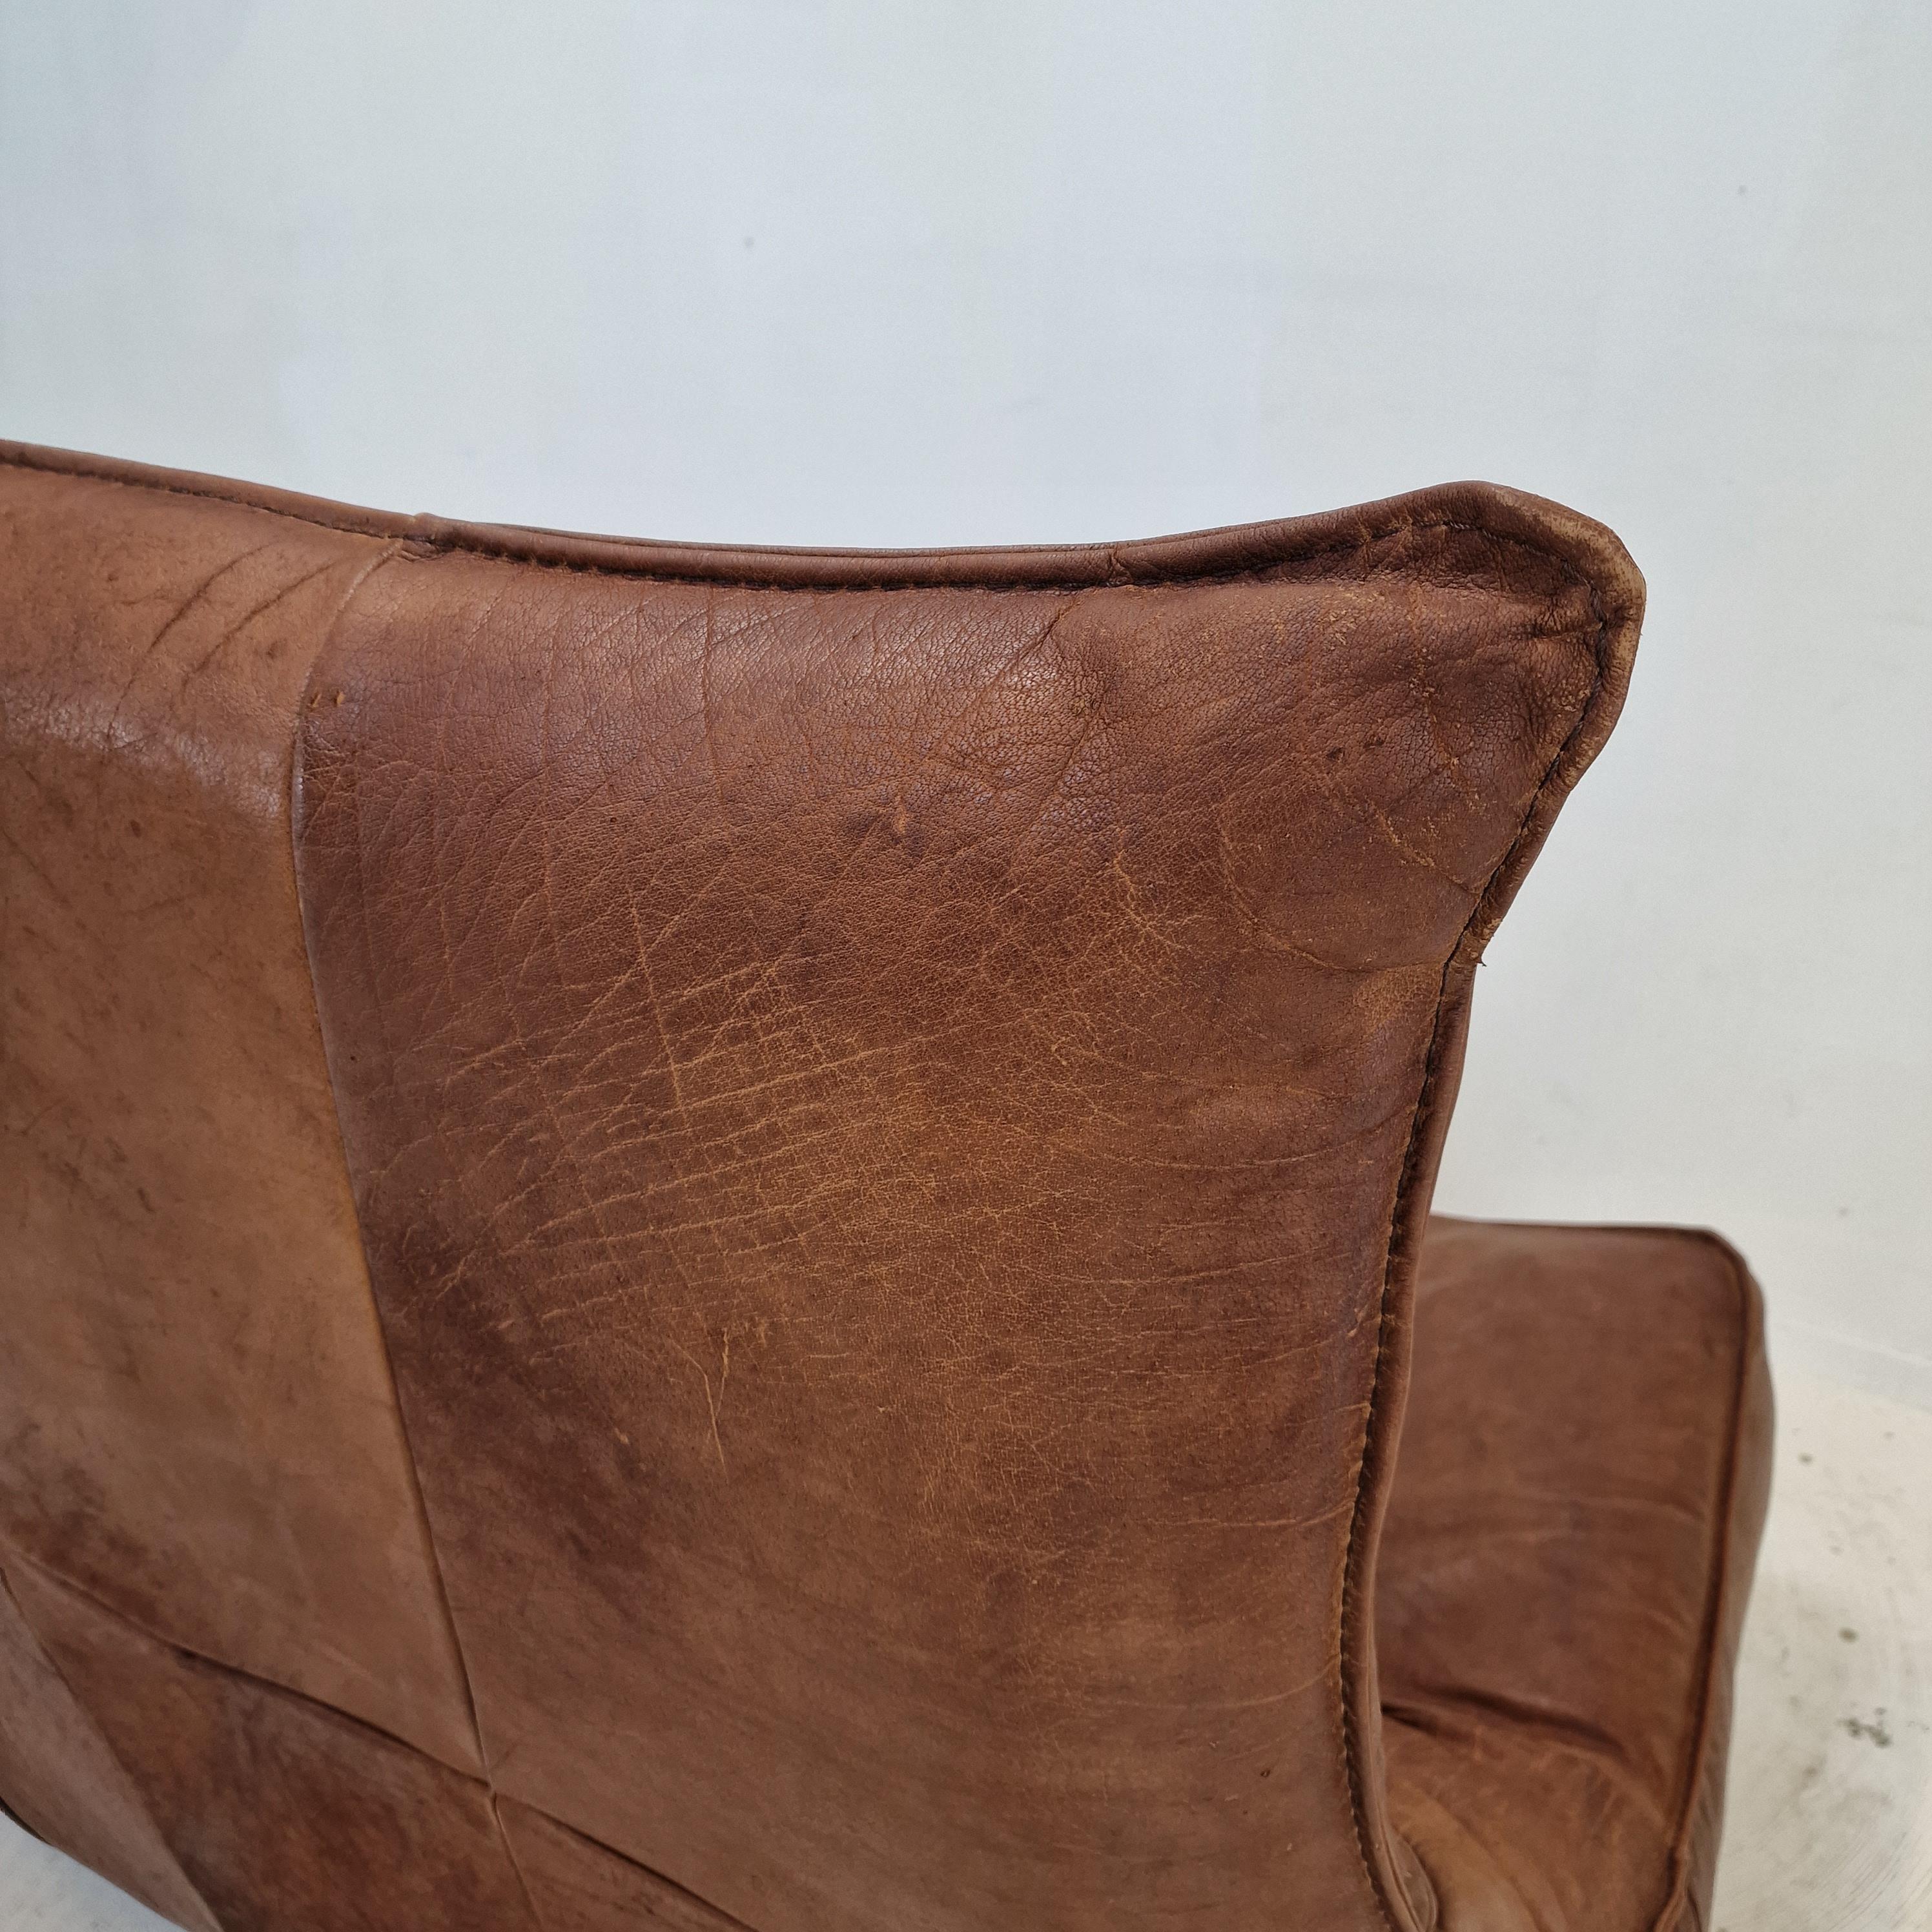 Montis “The Rock” Sofa In Brown Leather By Gerard Van Den Berg, 1970s For Sale 8